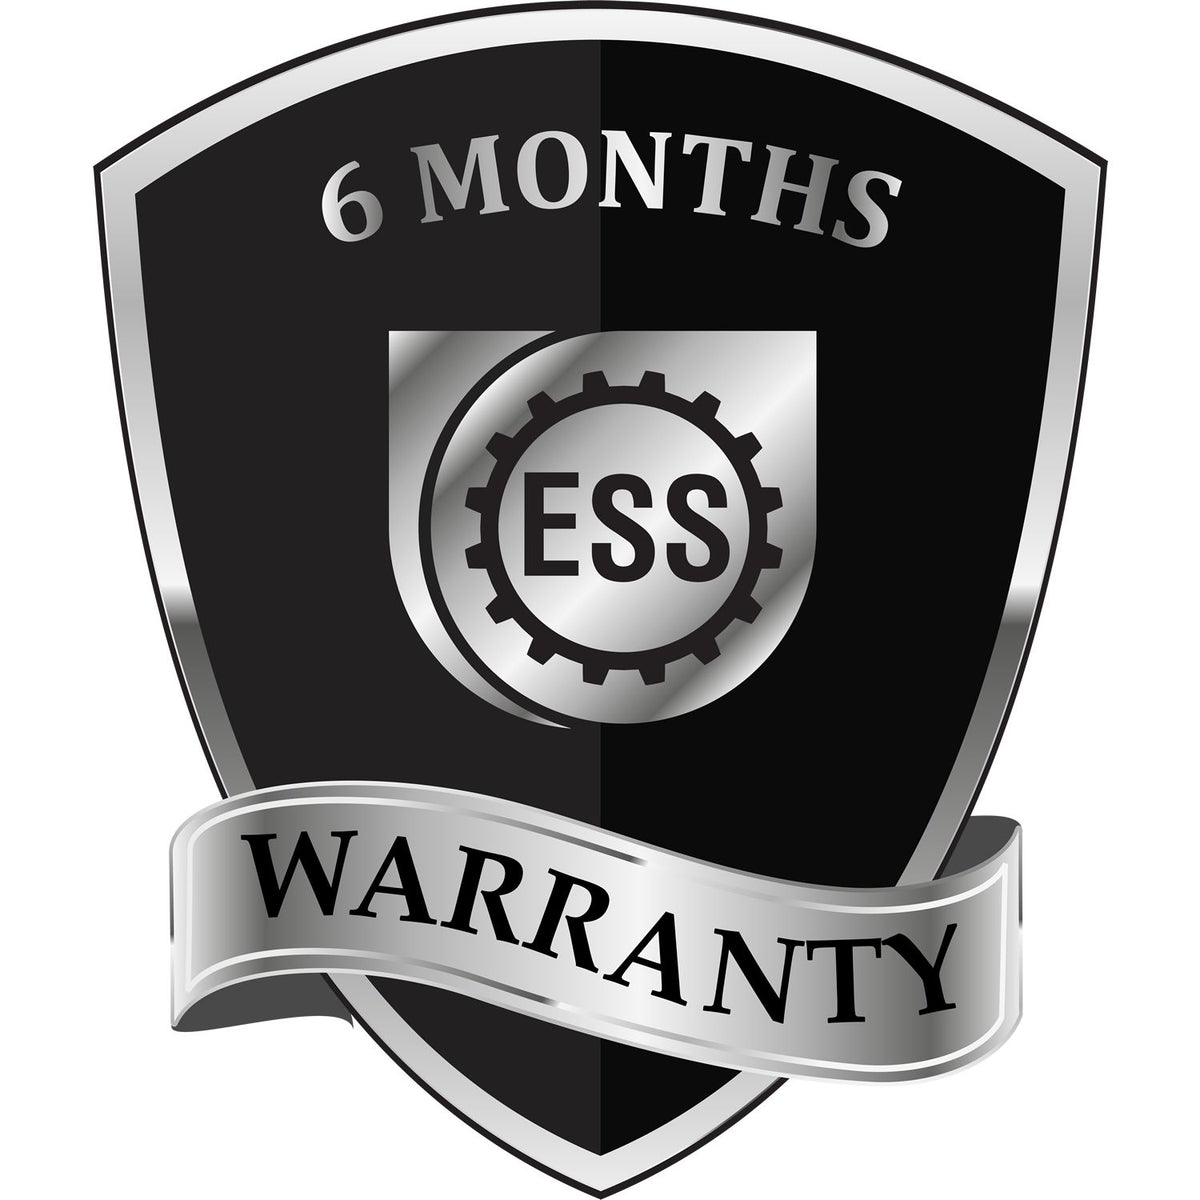 A badge or emblem showing a warranty icon for the Montana Professional Engineer Seal Stamp